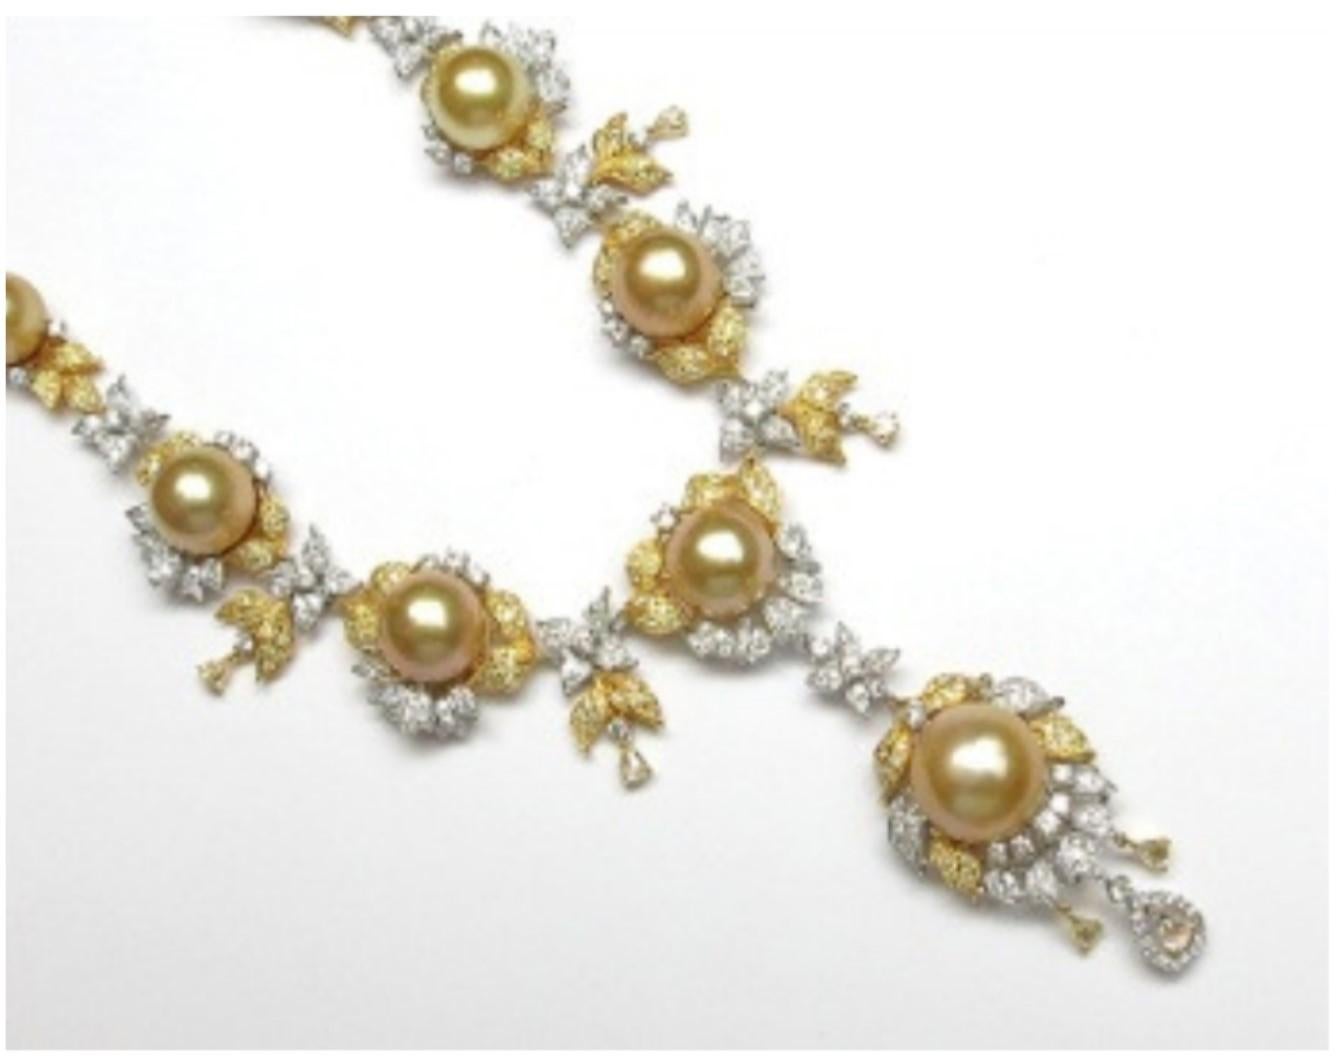 The Following Item we are offering is this Beautiful Important 18KT Gold Magnificent Rare Golden South Sea Pearl and Fancy Yellow Diamond Necklace. Necklace is comprised of 14 Beautiful Magnificent High Luster Large South Sea Golden Pearls that